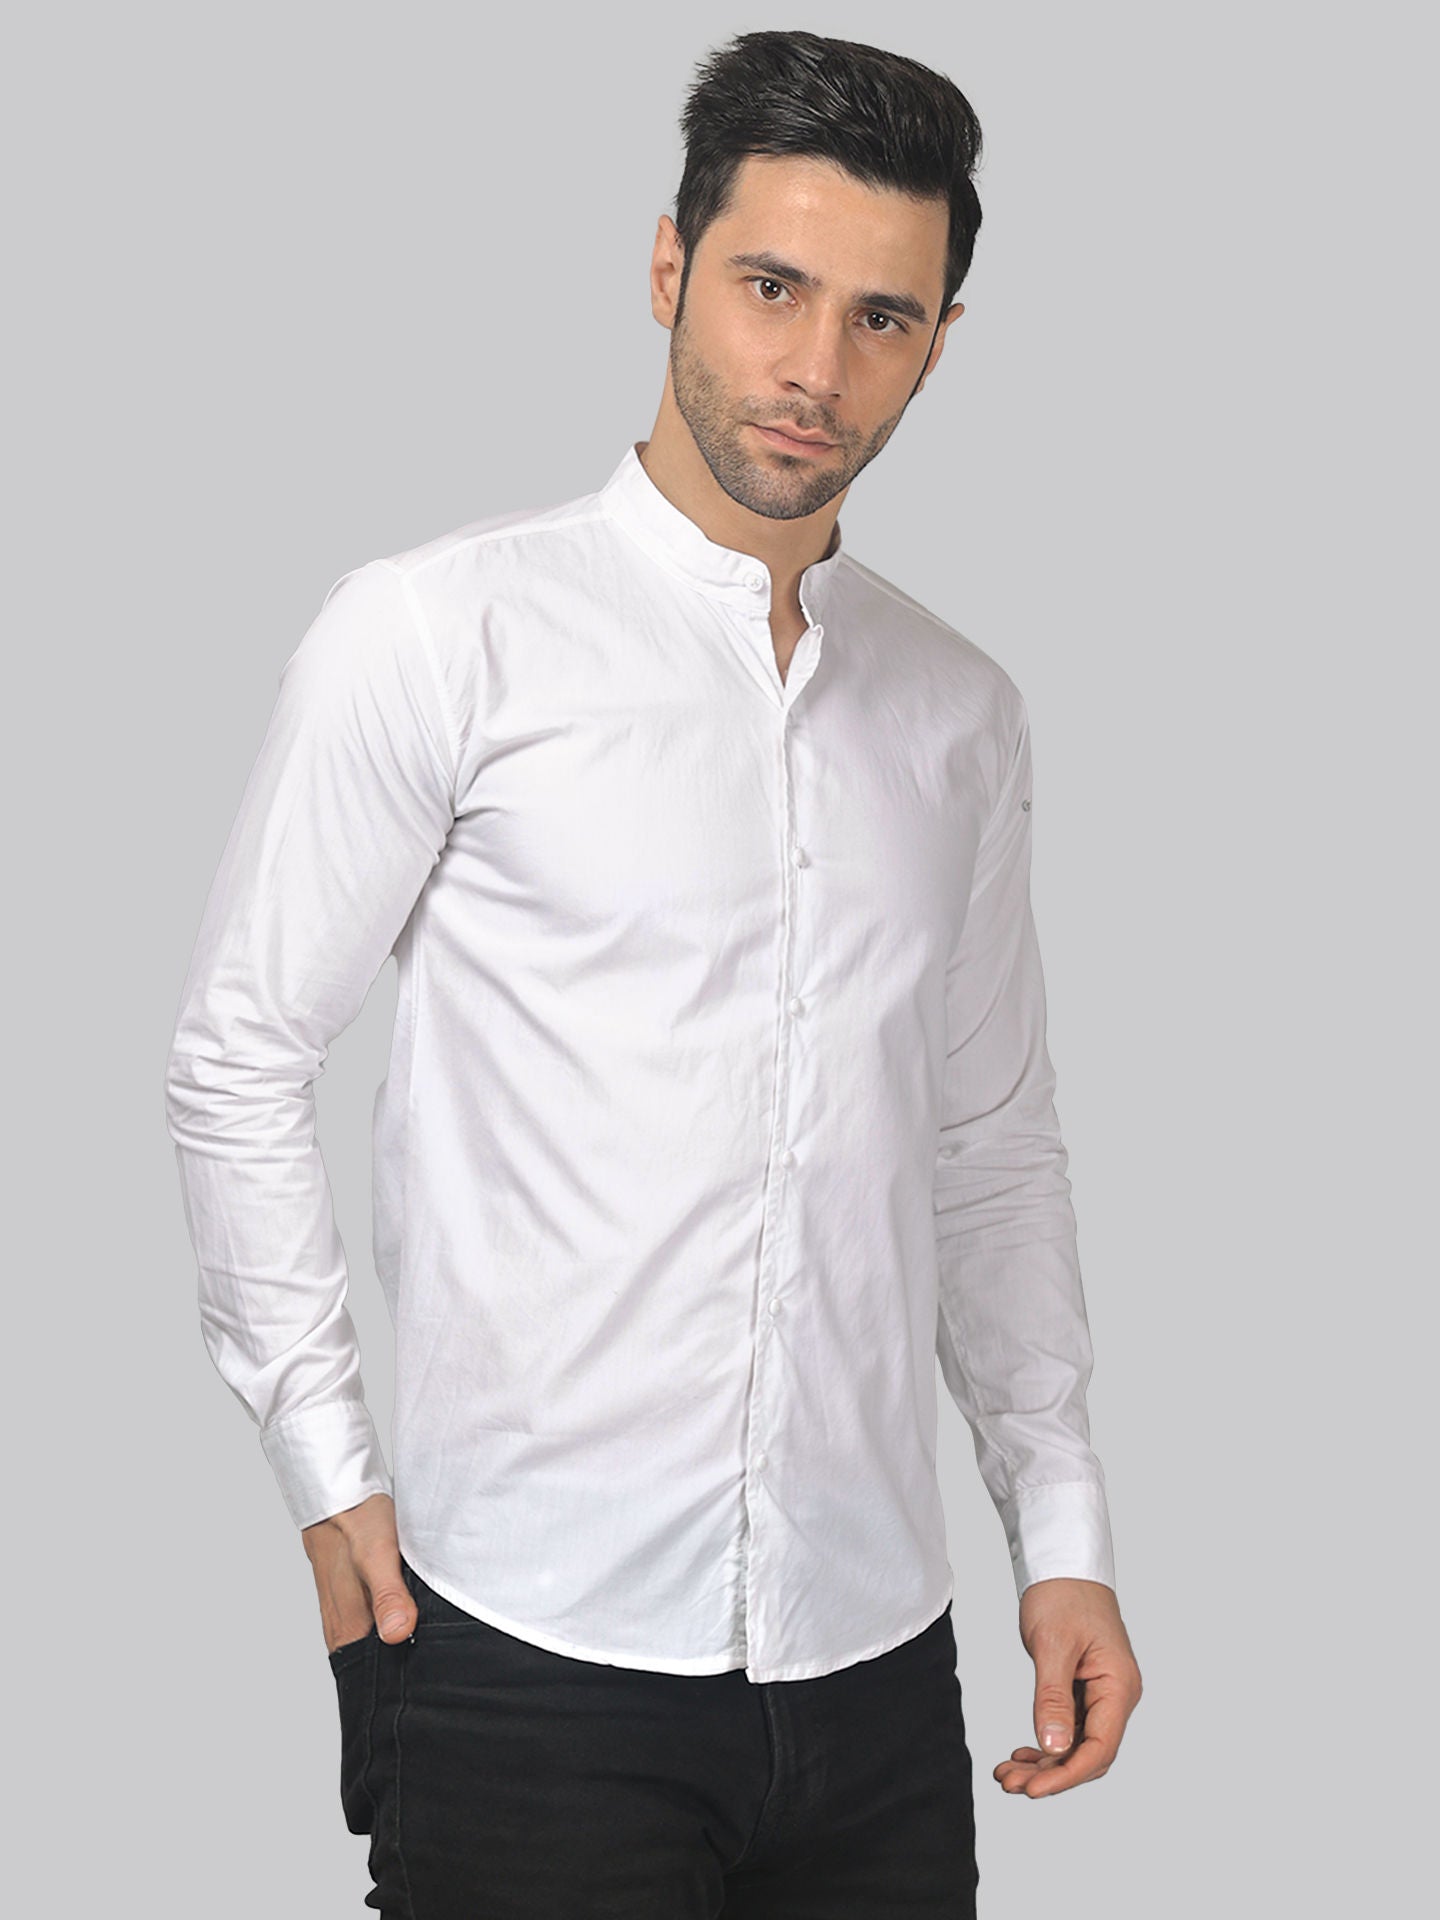 Urban-chic TryBuy Premium Solid White Cotton Casual Shirt for Men - TryBuy® USA🇺🇸